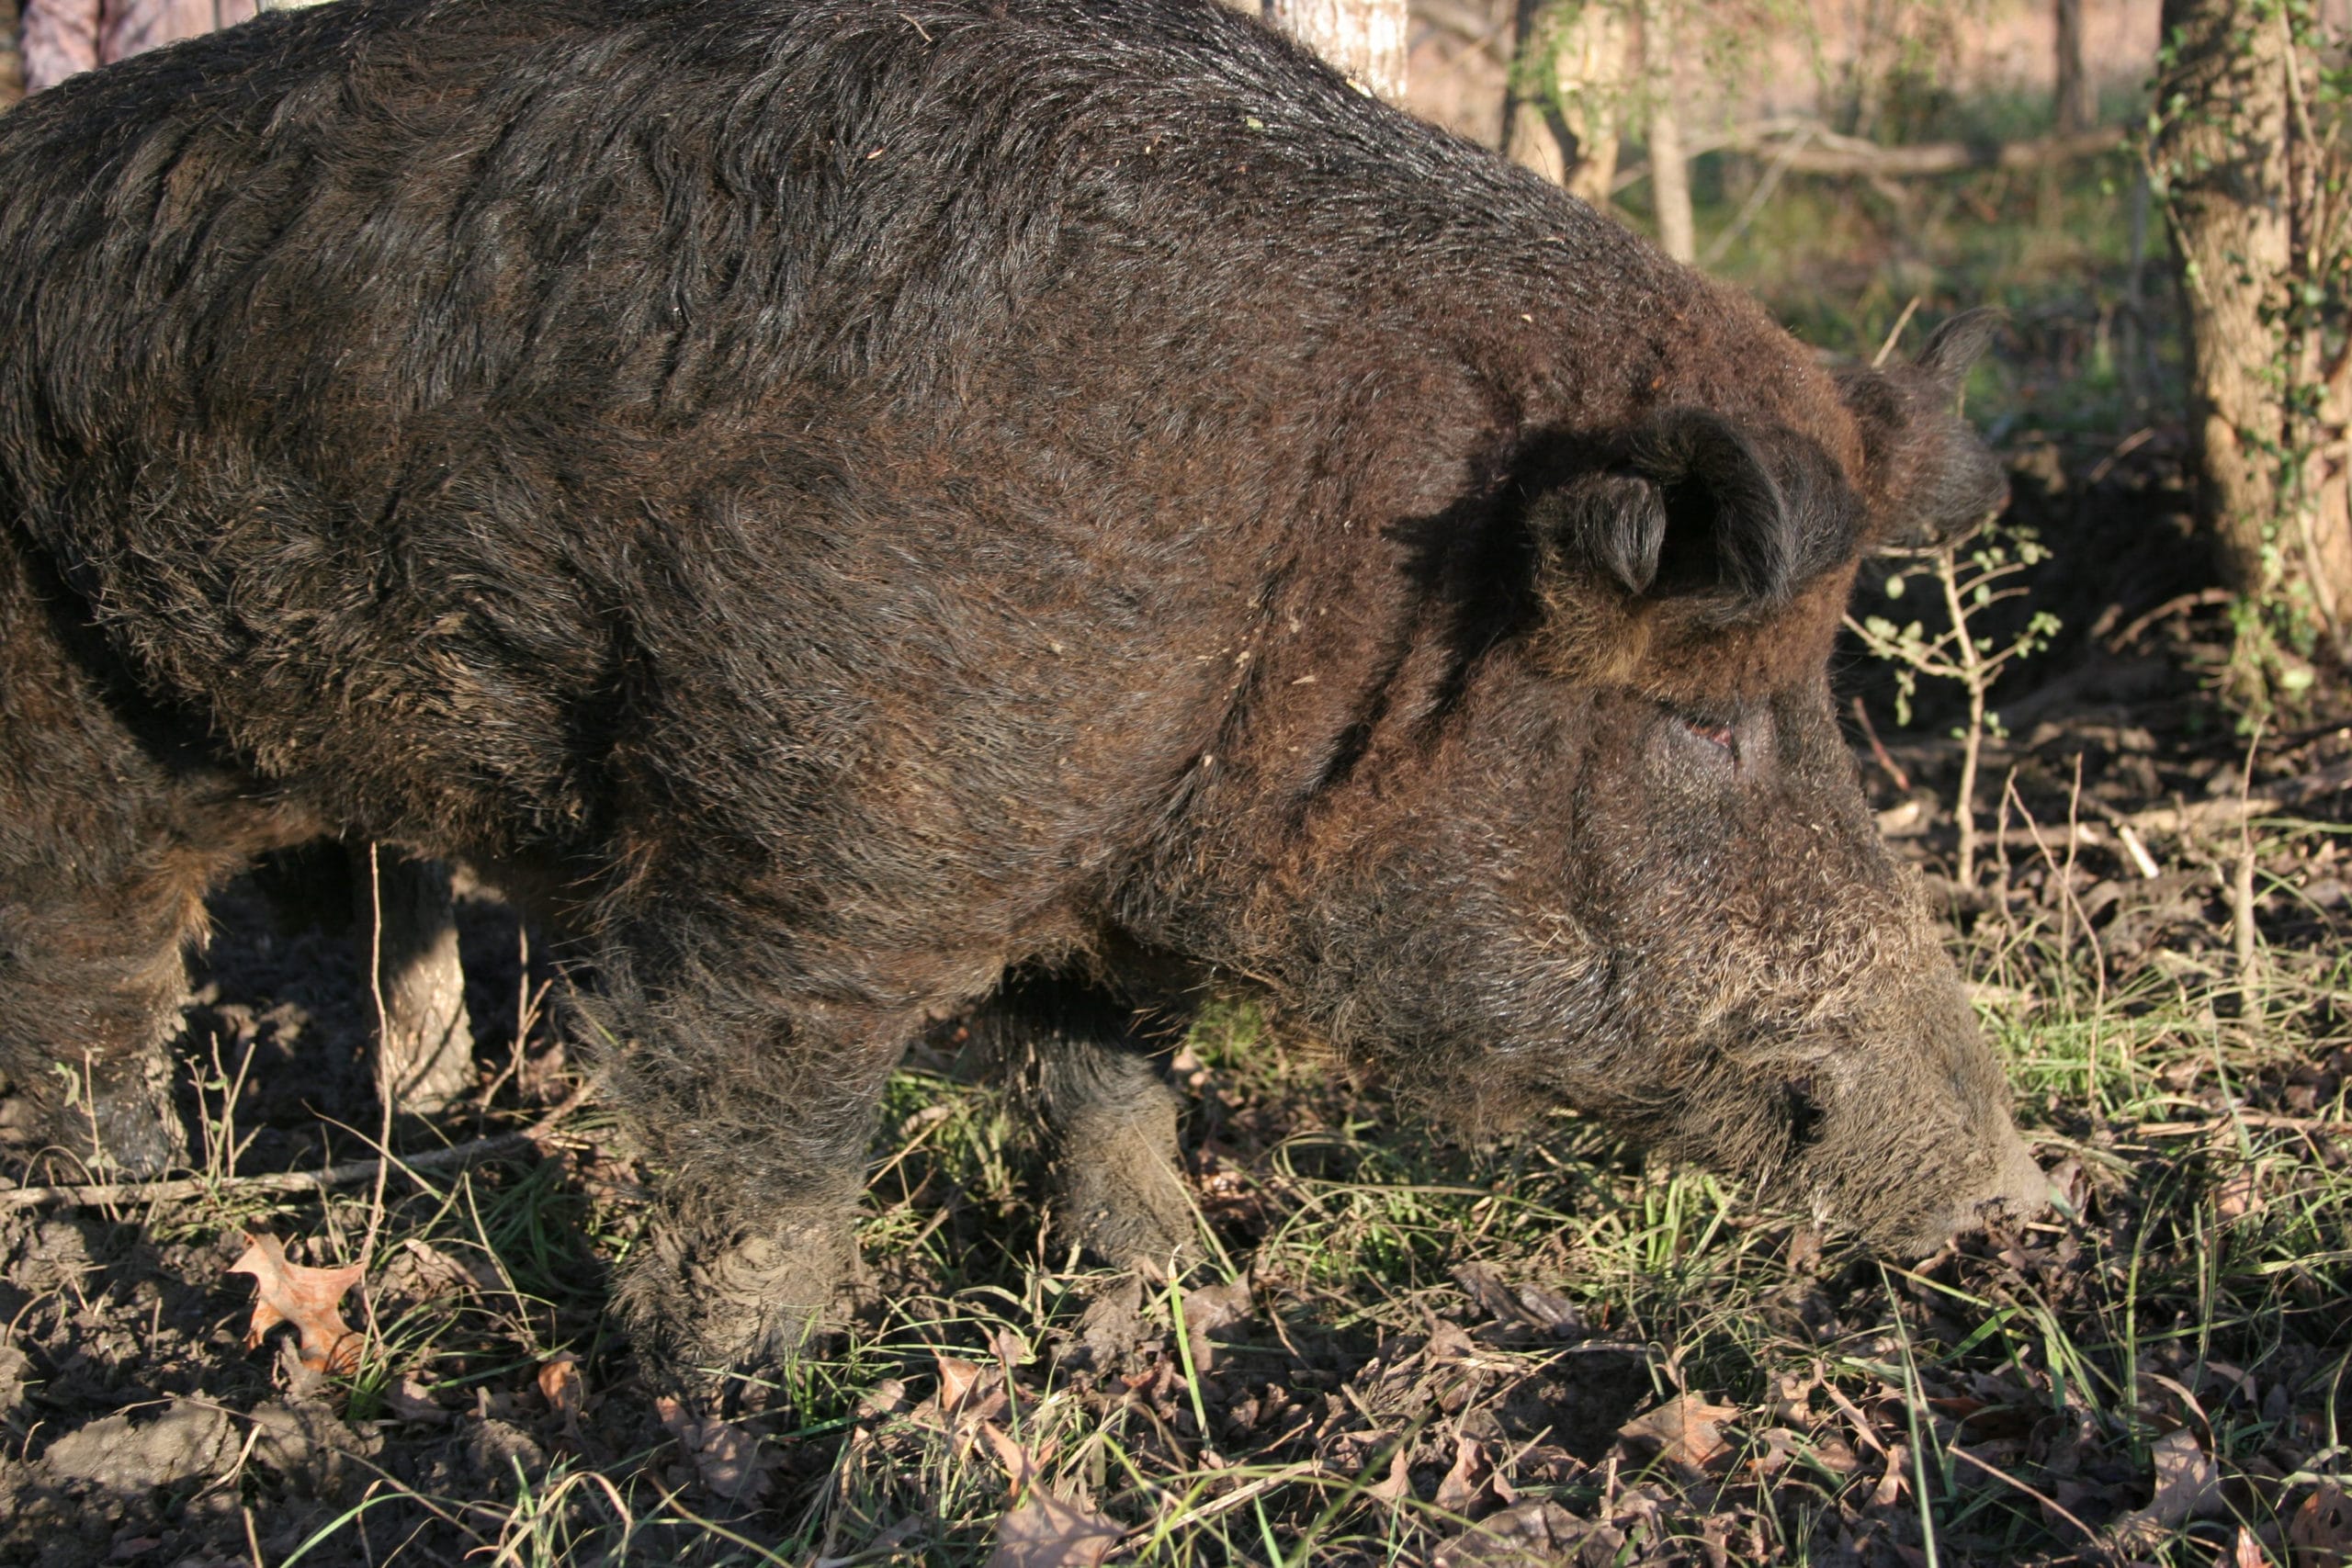 State and federal agencies are declaring war on feral pigs in the United States, allocating millions of dollars to stop the spread of this non-native critter. That means for sportsmen there are liberal opportunities for exciting hunts that can result in delicious meat.